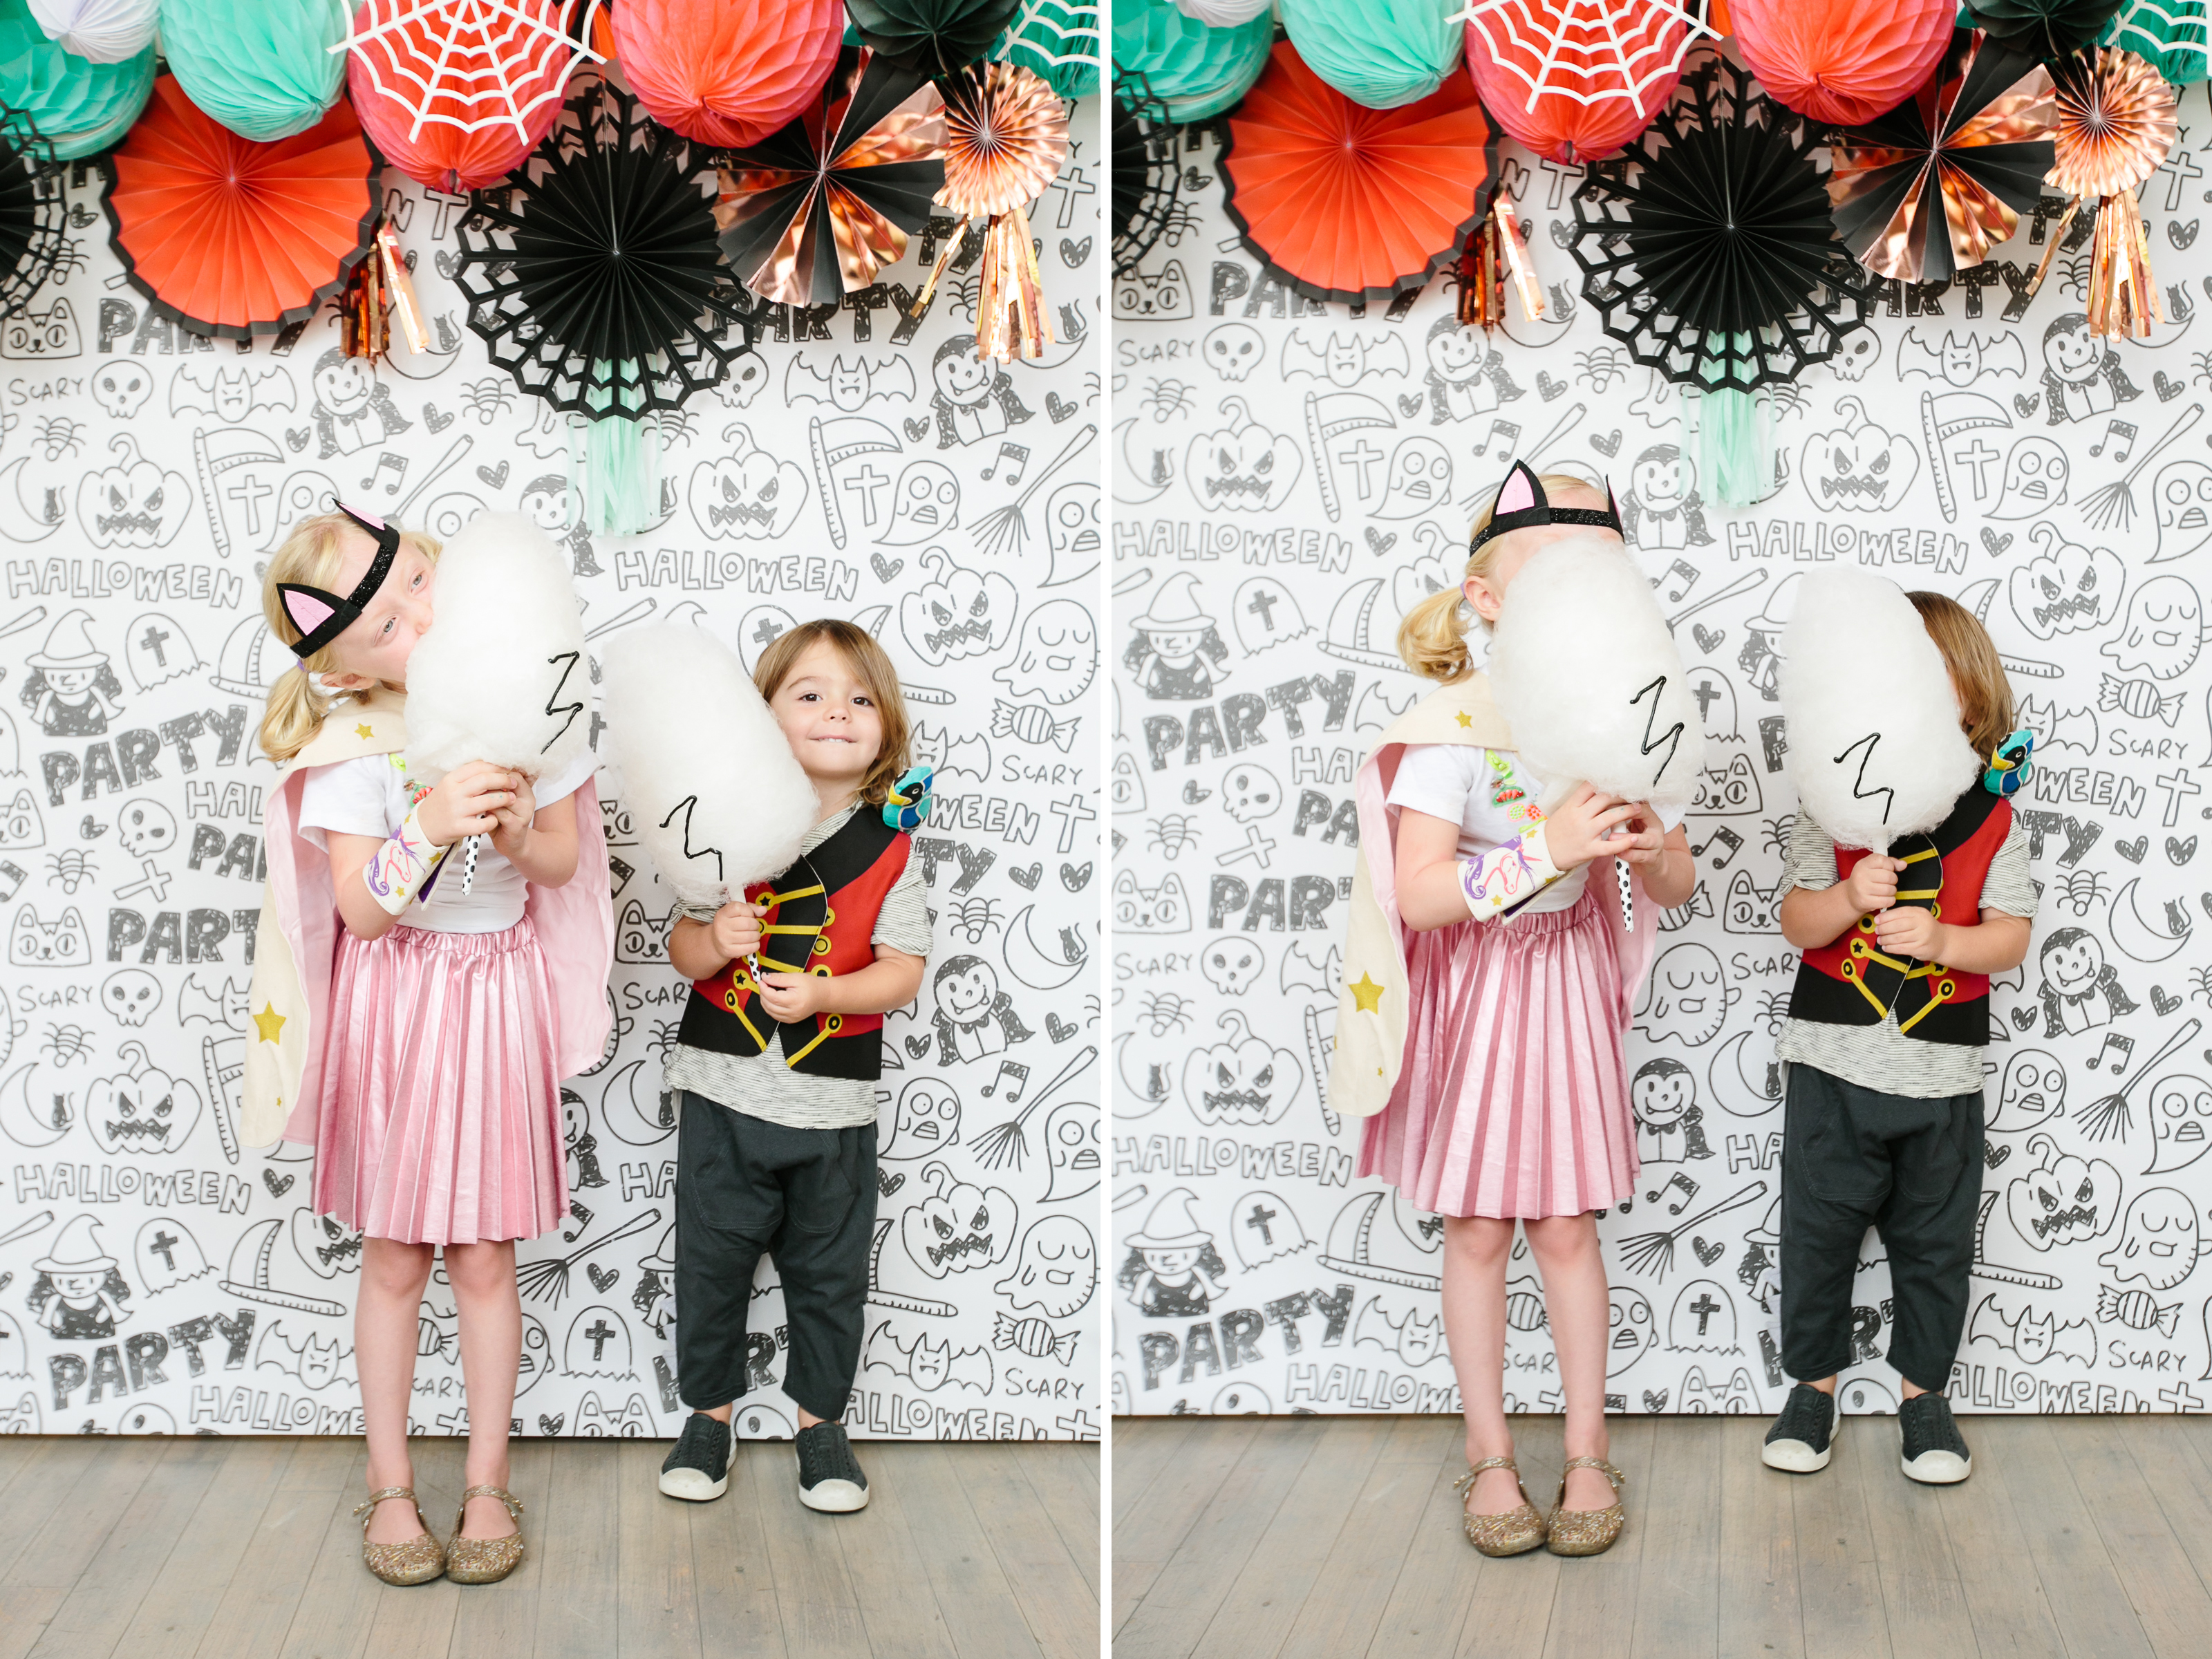 Kids eating Bride of Frankenstein cotton candy in front of Halloween photo backdrop 